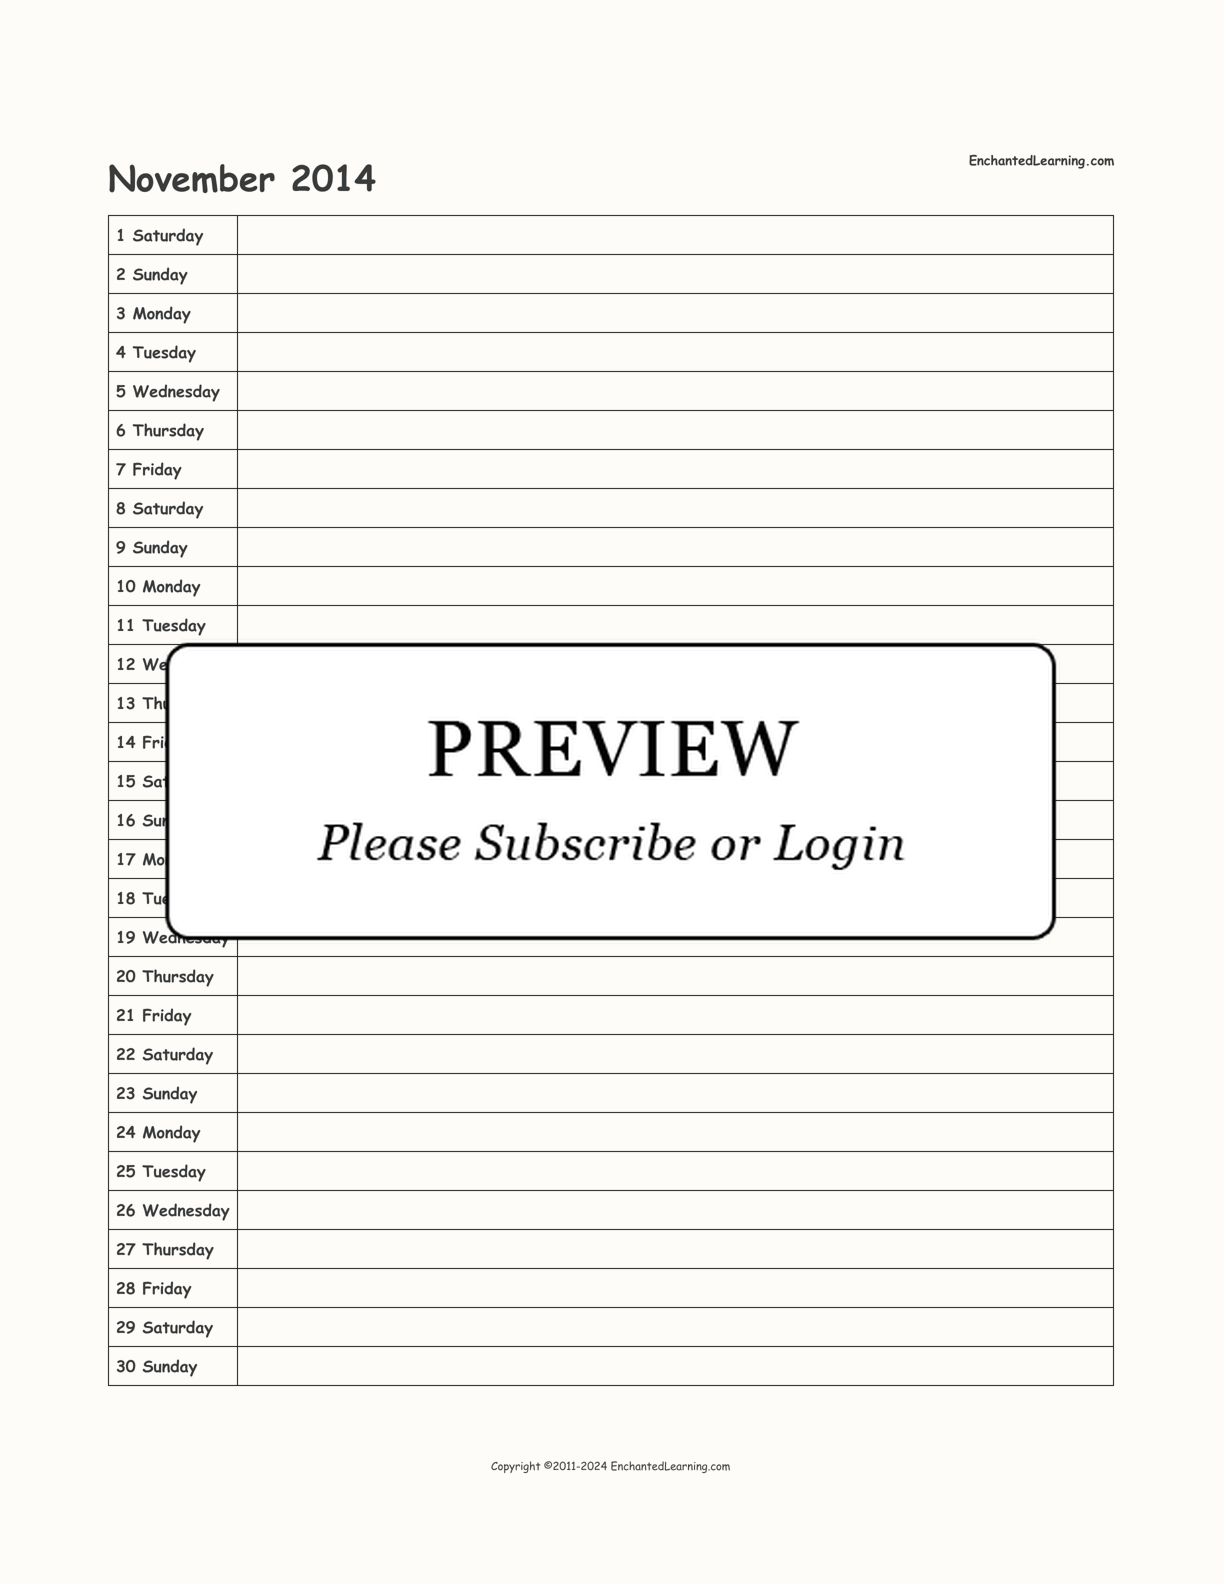 2014 Scheduling Calendar interactive printout page 11